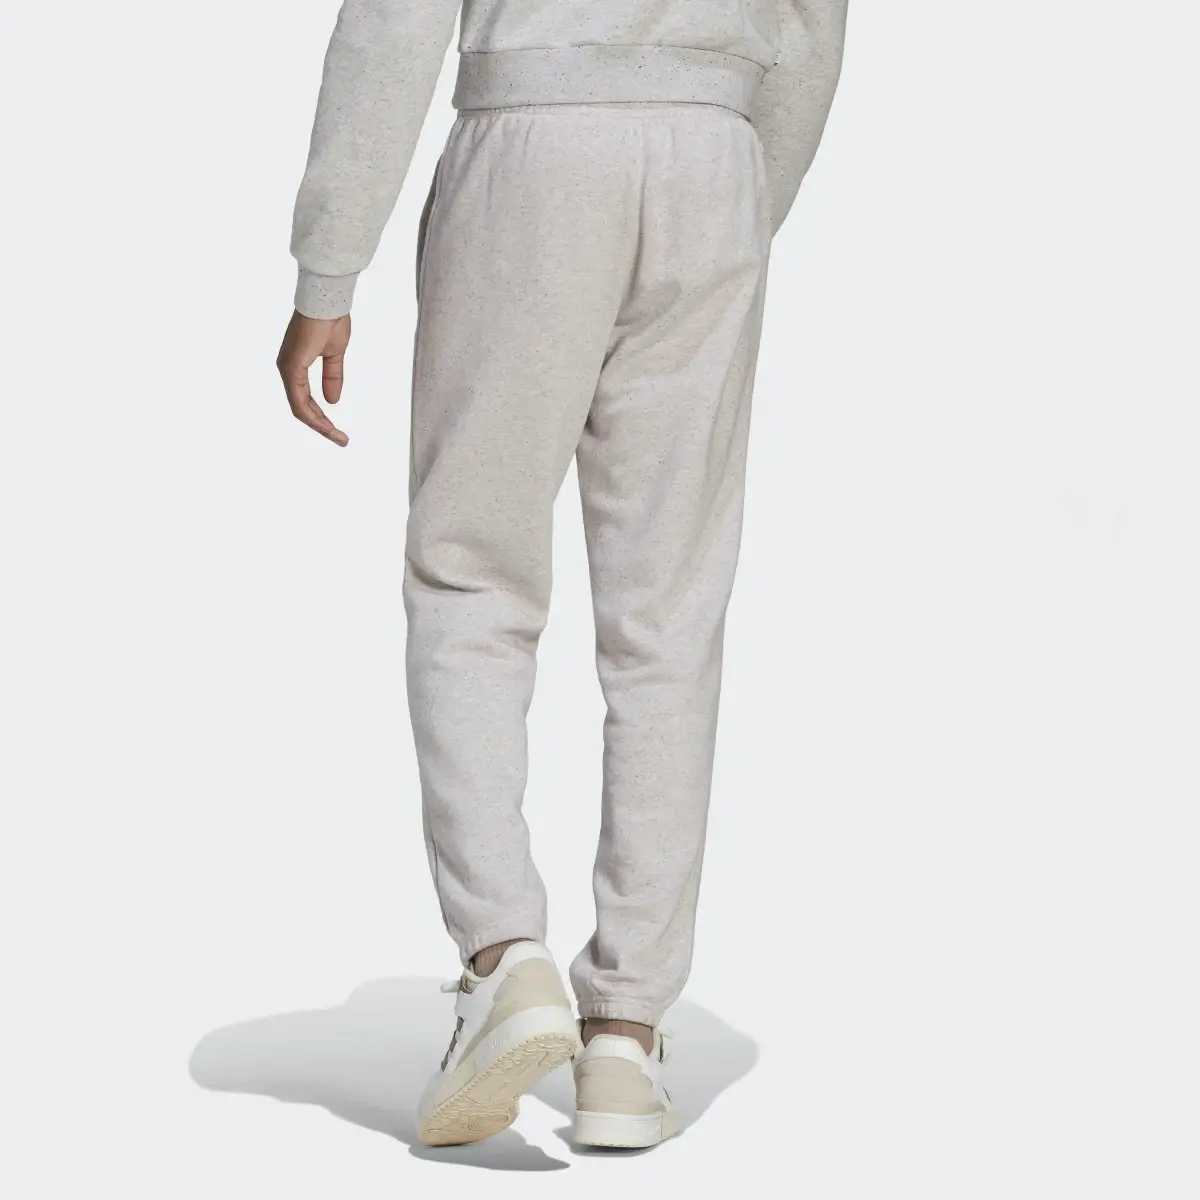 Adidas Sweat pants Essentials+ Made with Nature. 3